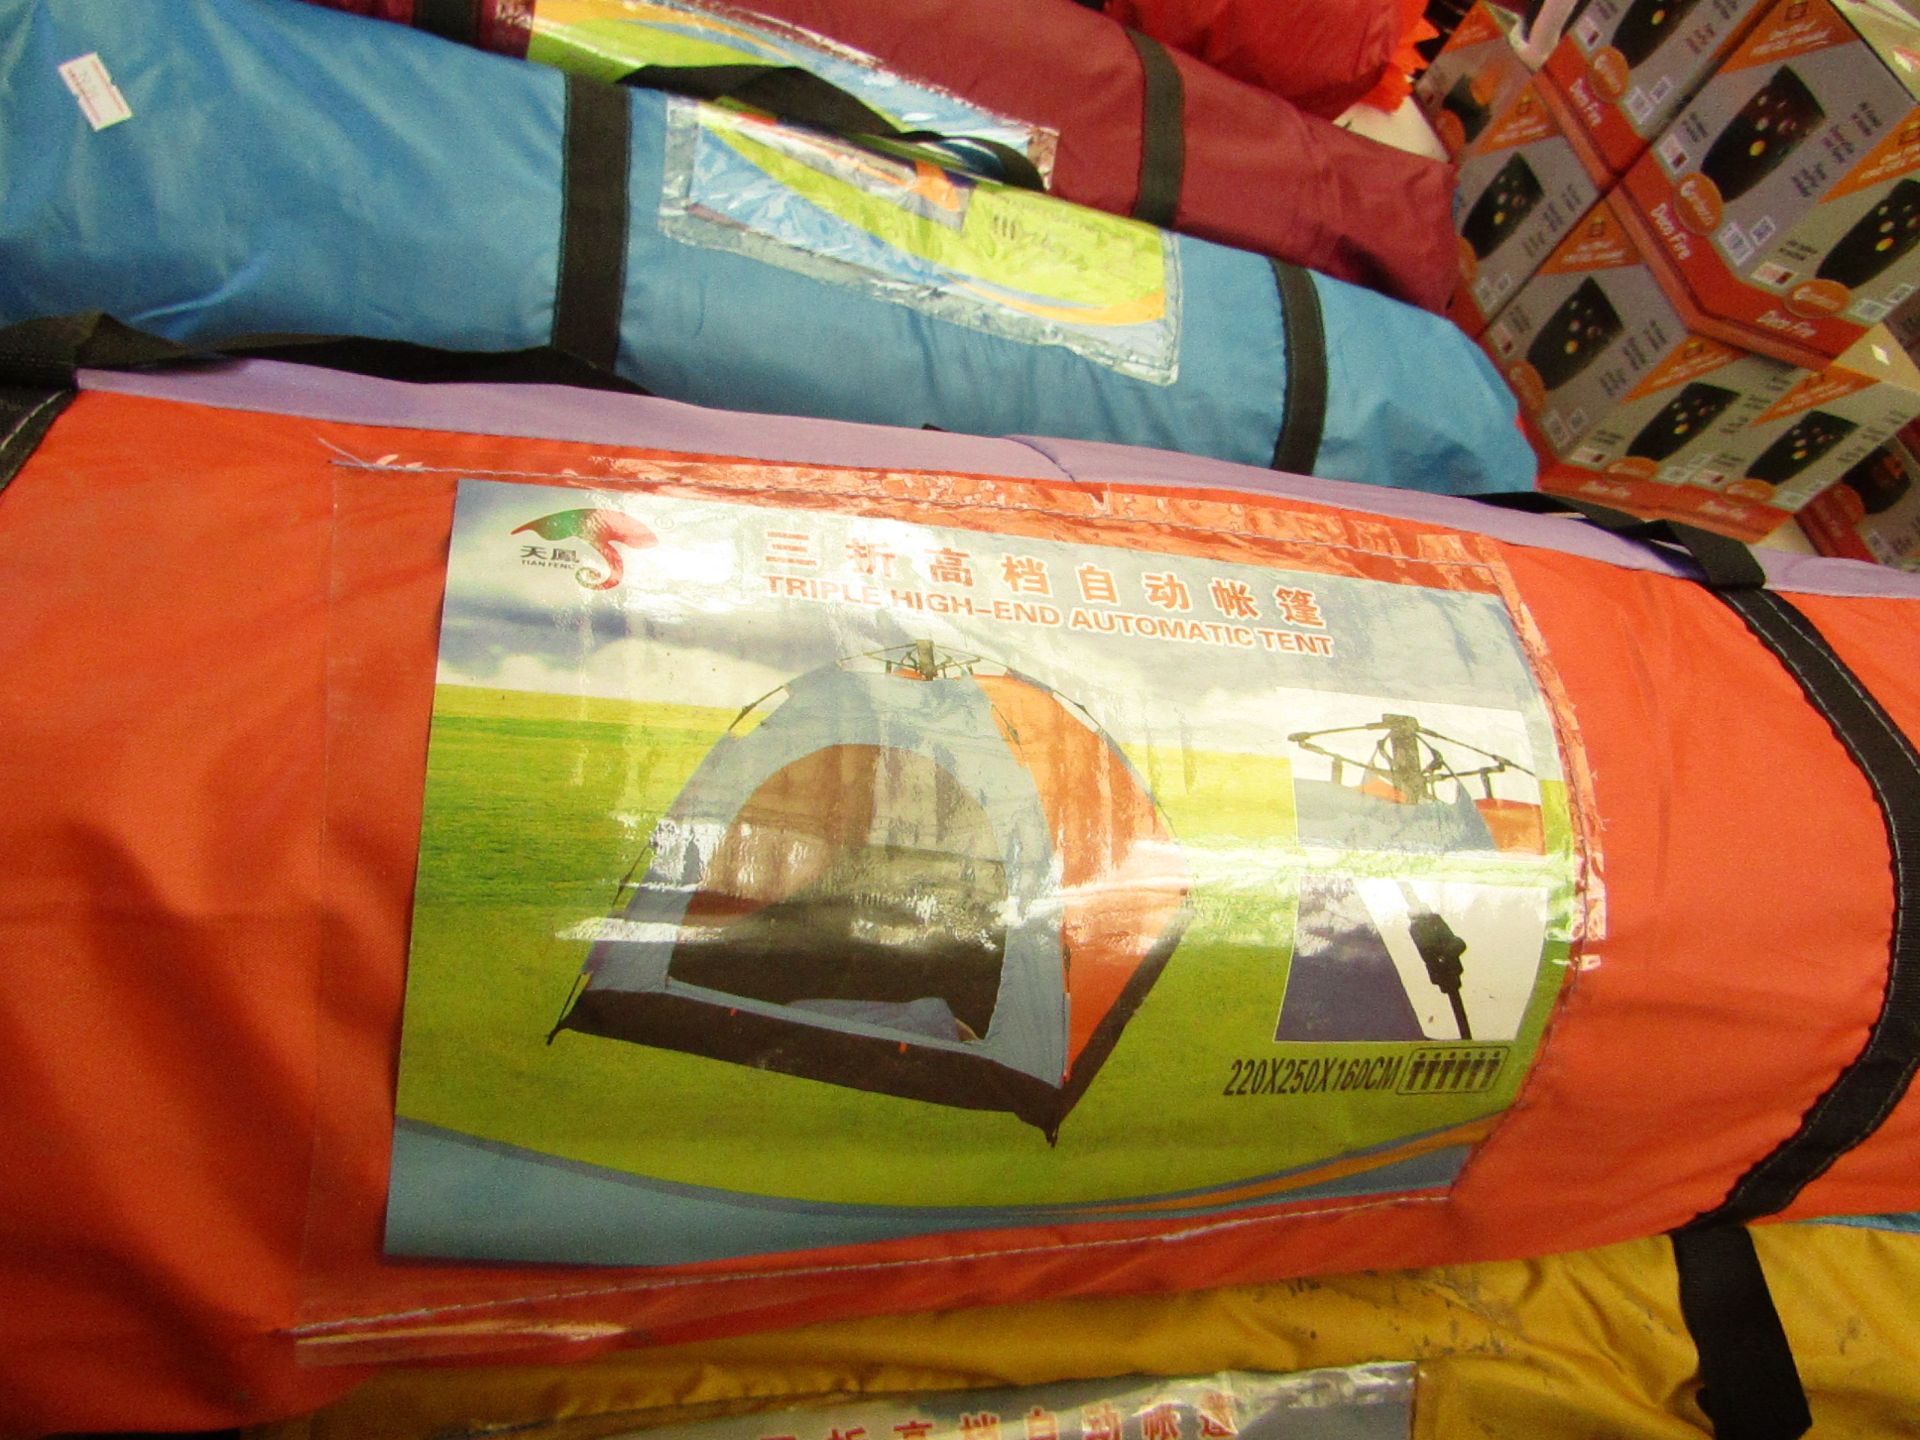 Pop Up 6man tent,220 x 250 x 160cm,new in carry bag